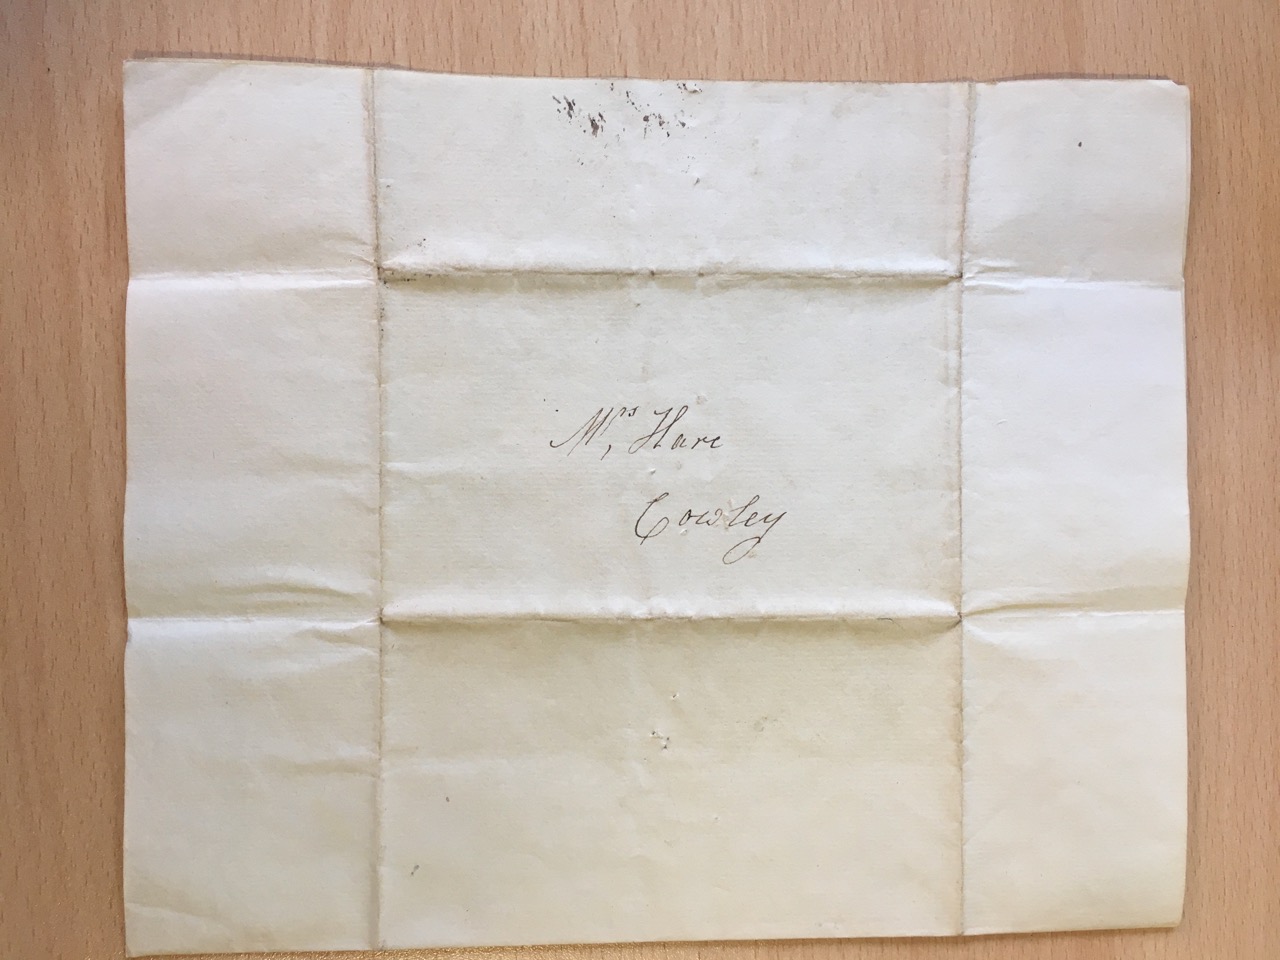 Image #4 of letter: Isabella Benson to Ann Hare, 12 August 1787